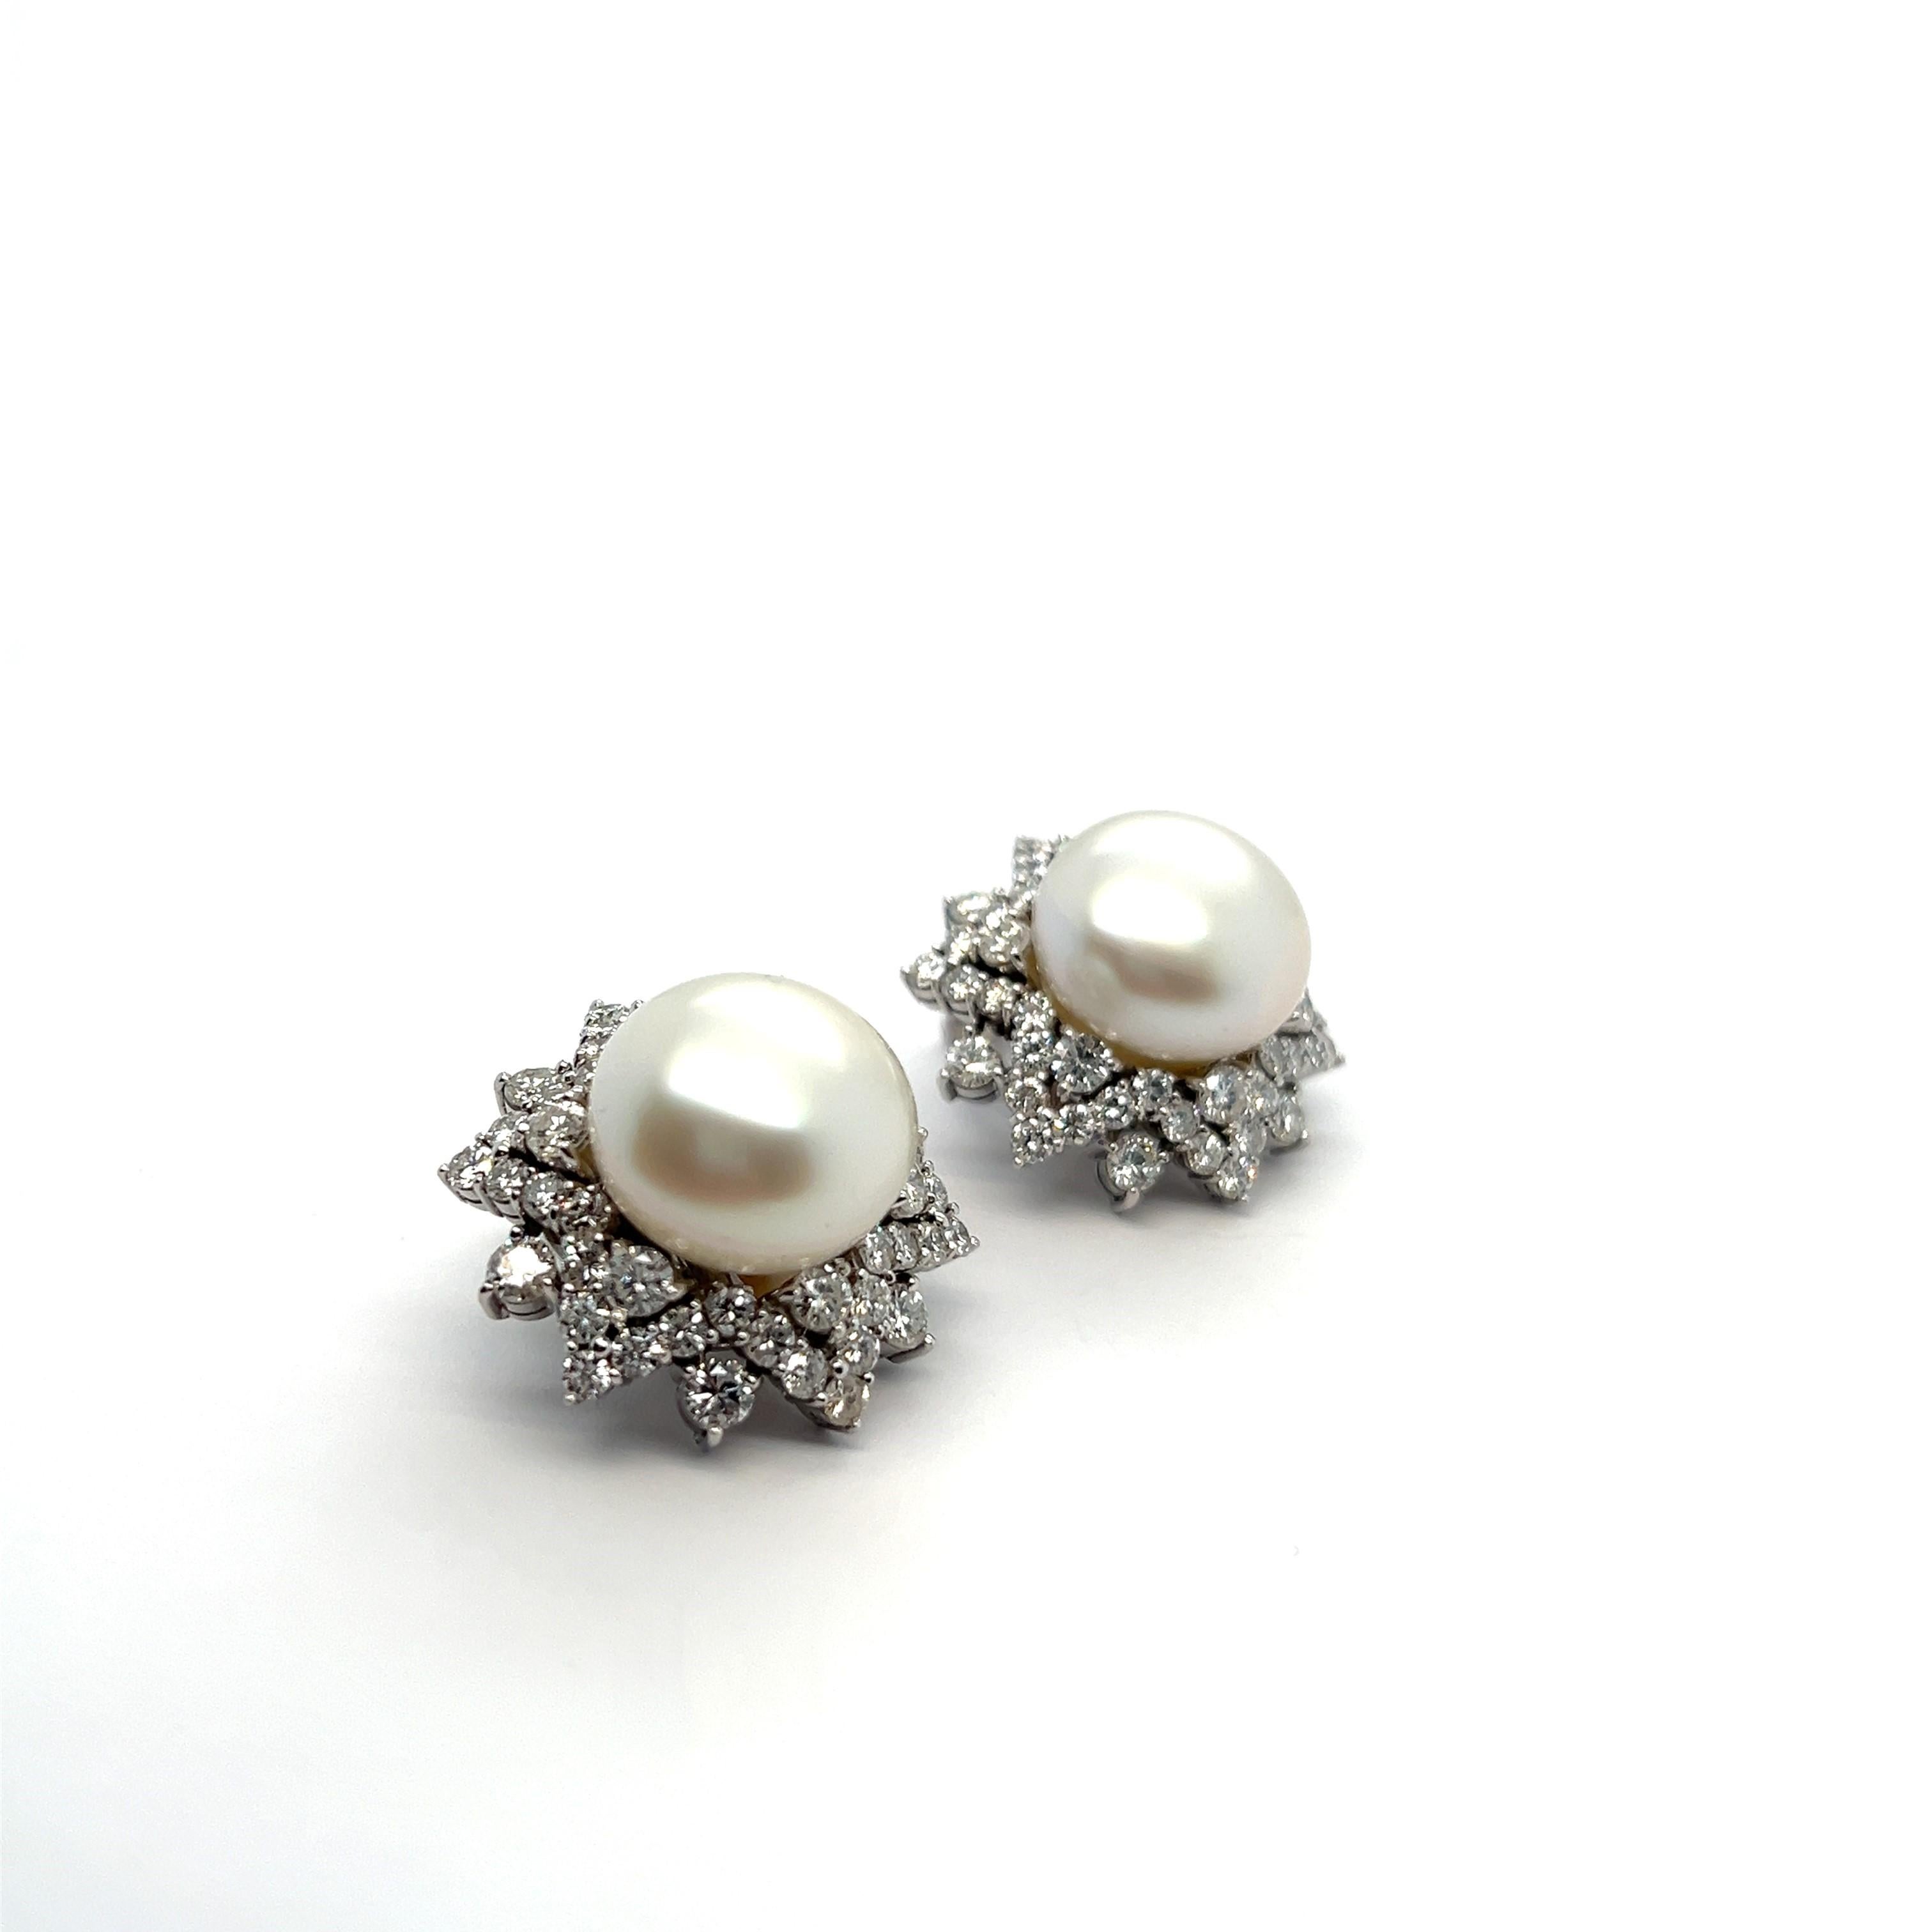 South Sea Pearl Earrings in 18 Karat White Gold by Meister For Sale 8